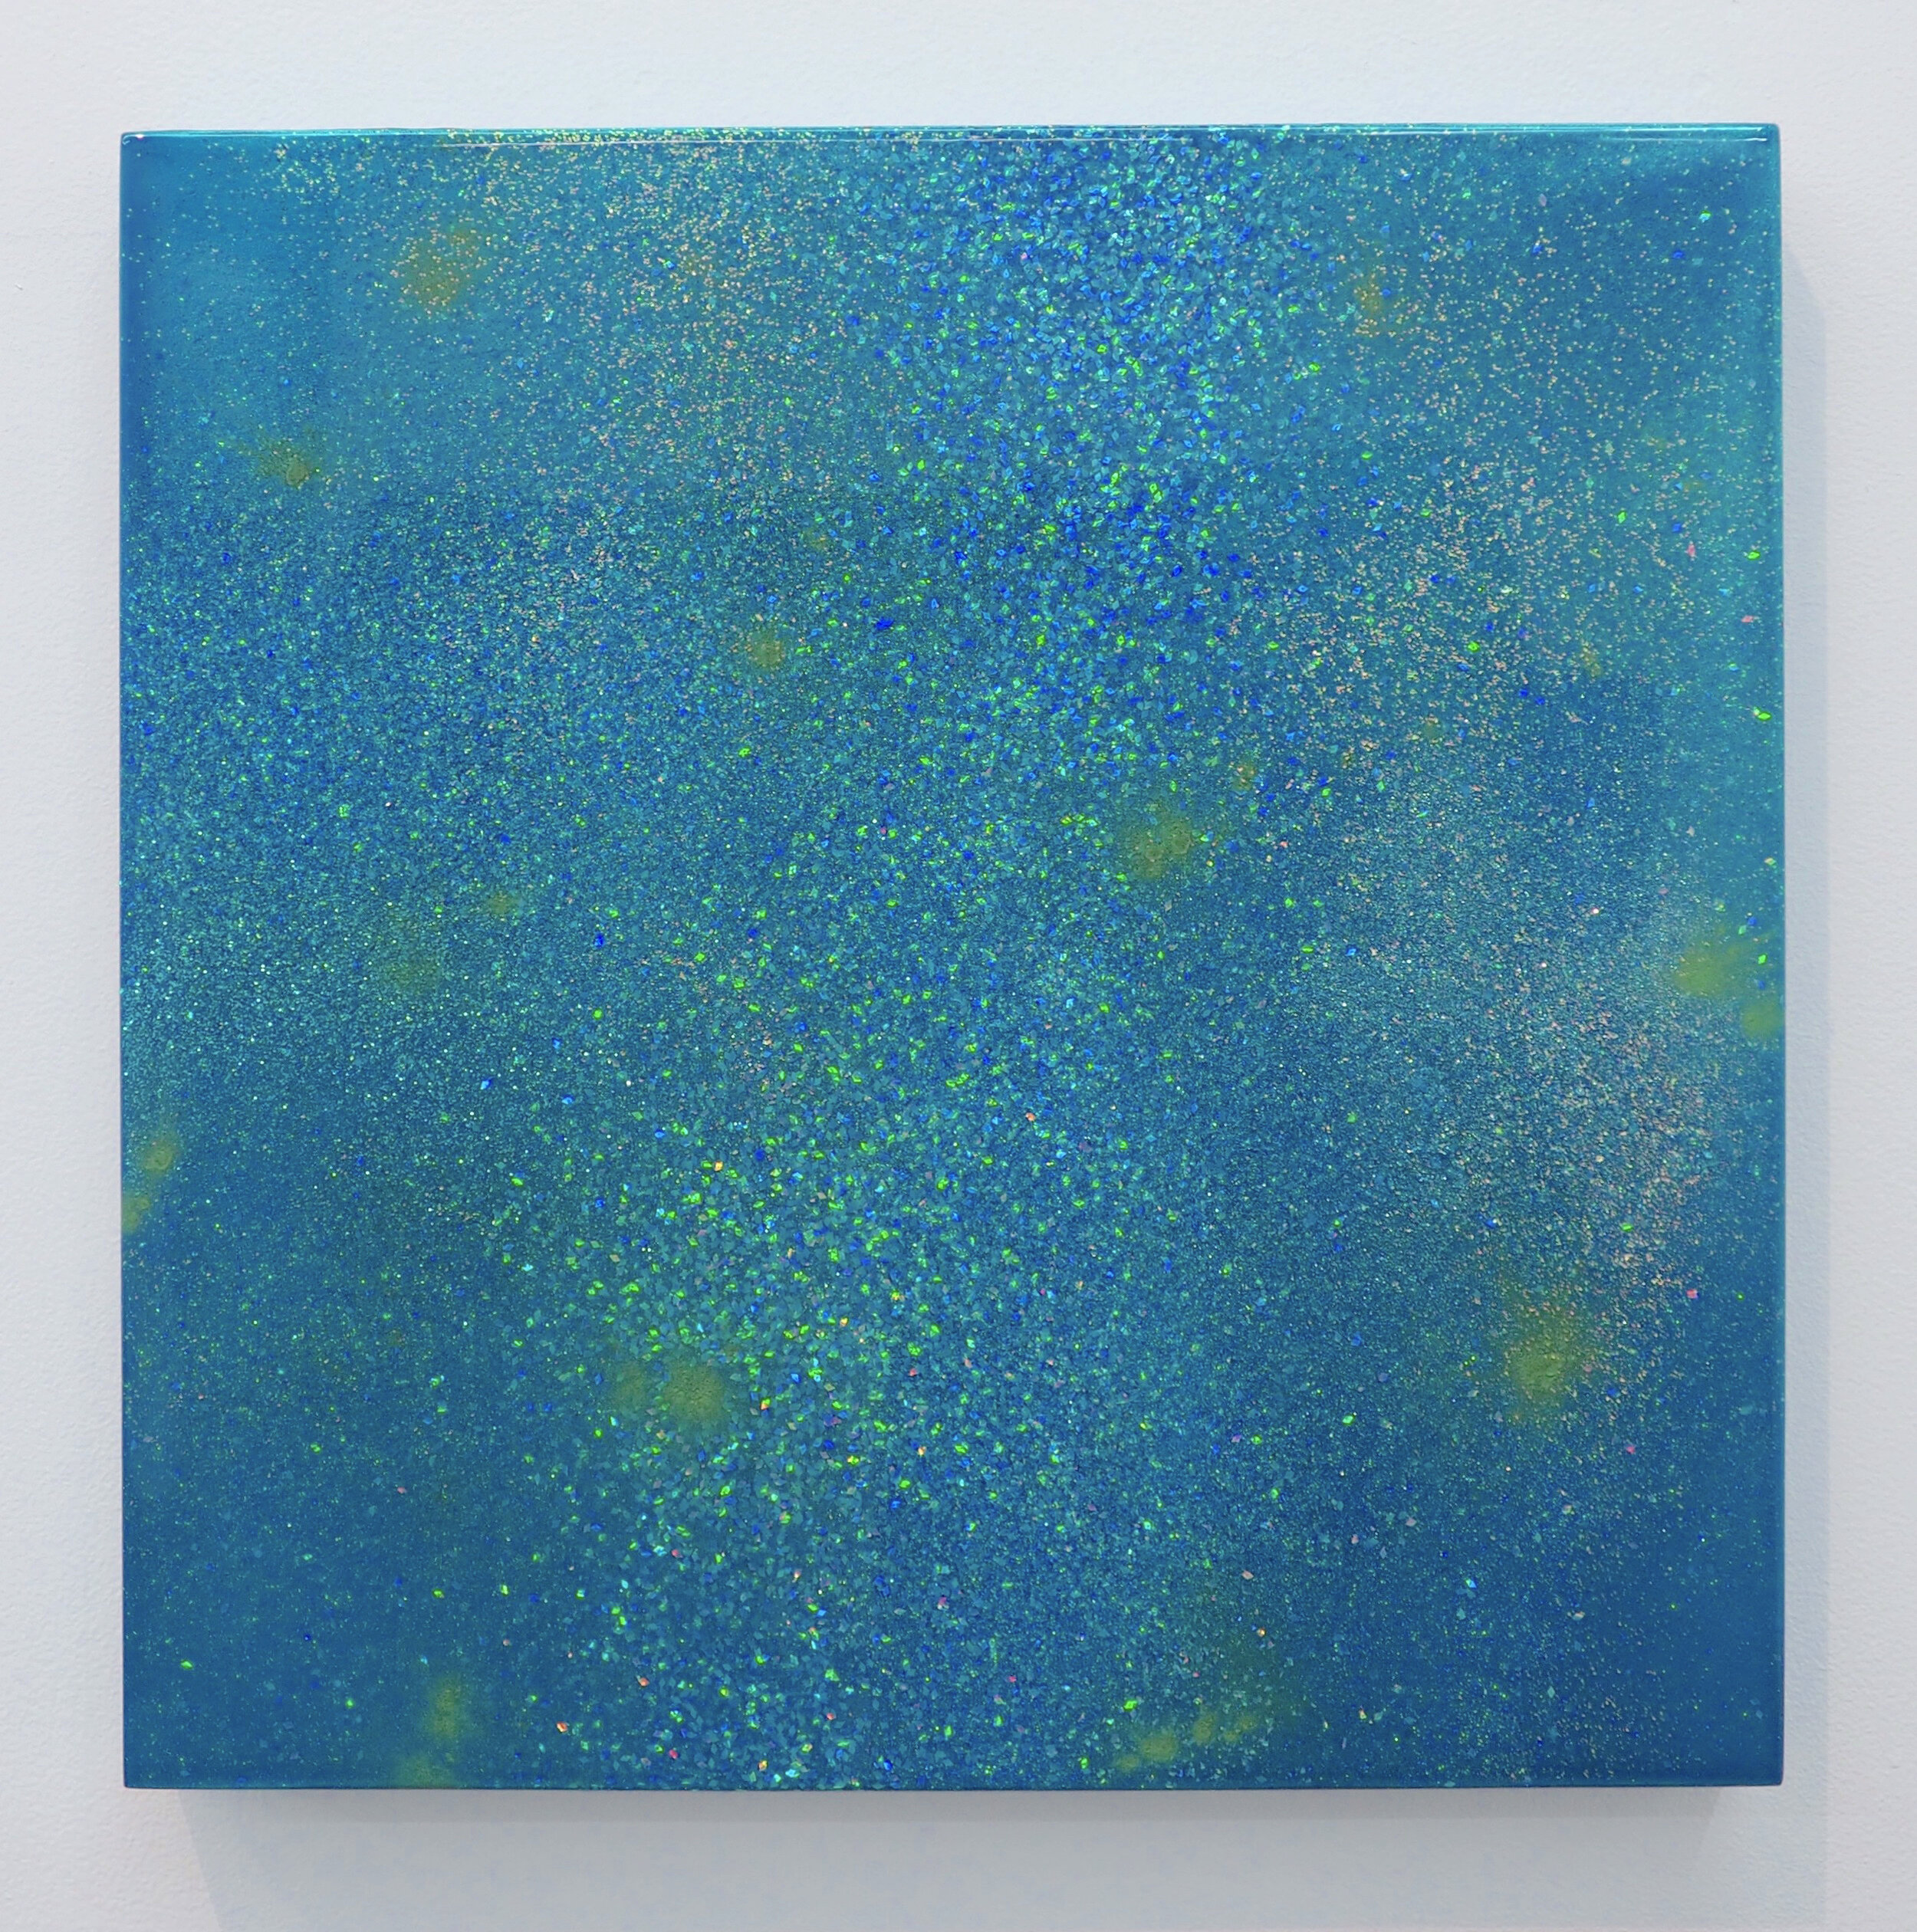   Green Blow , 2020 urethane, candy paint, flake, holographic flake, and pearl flake on wood panel 18 x 18 in (45.7 x 45.7 cm)  